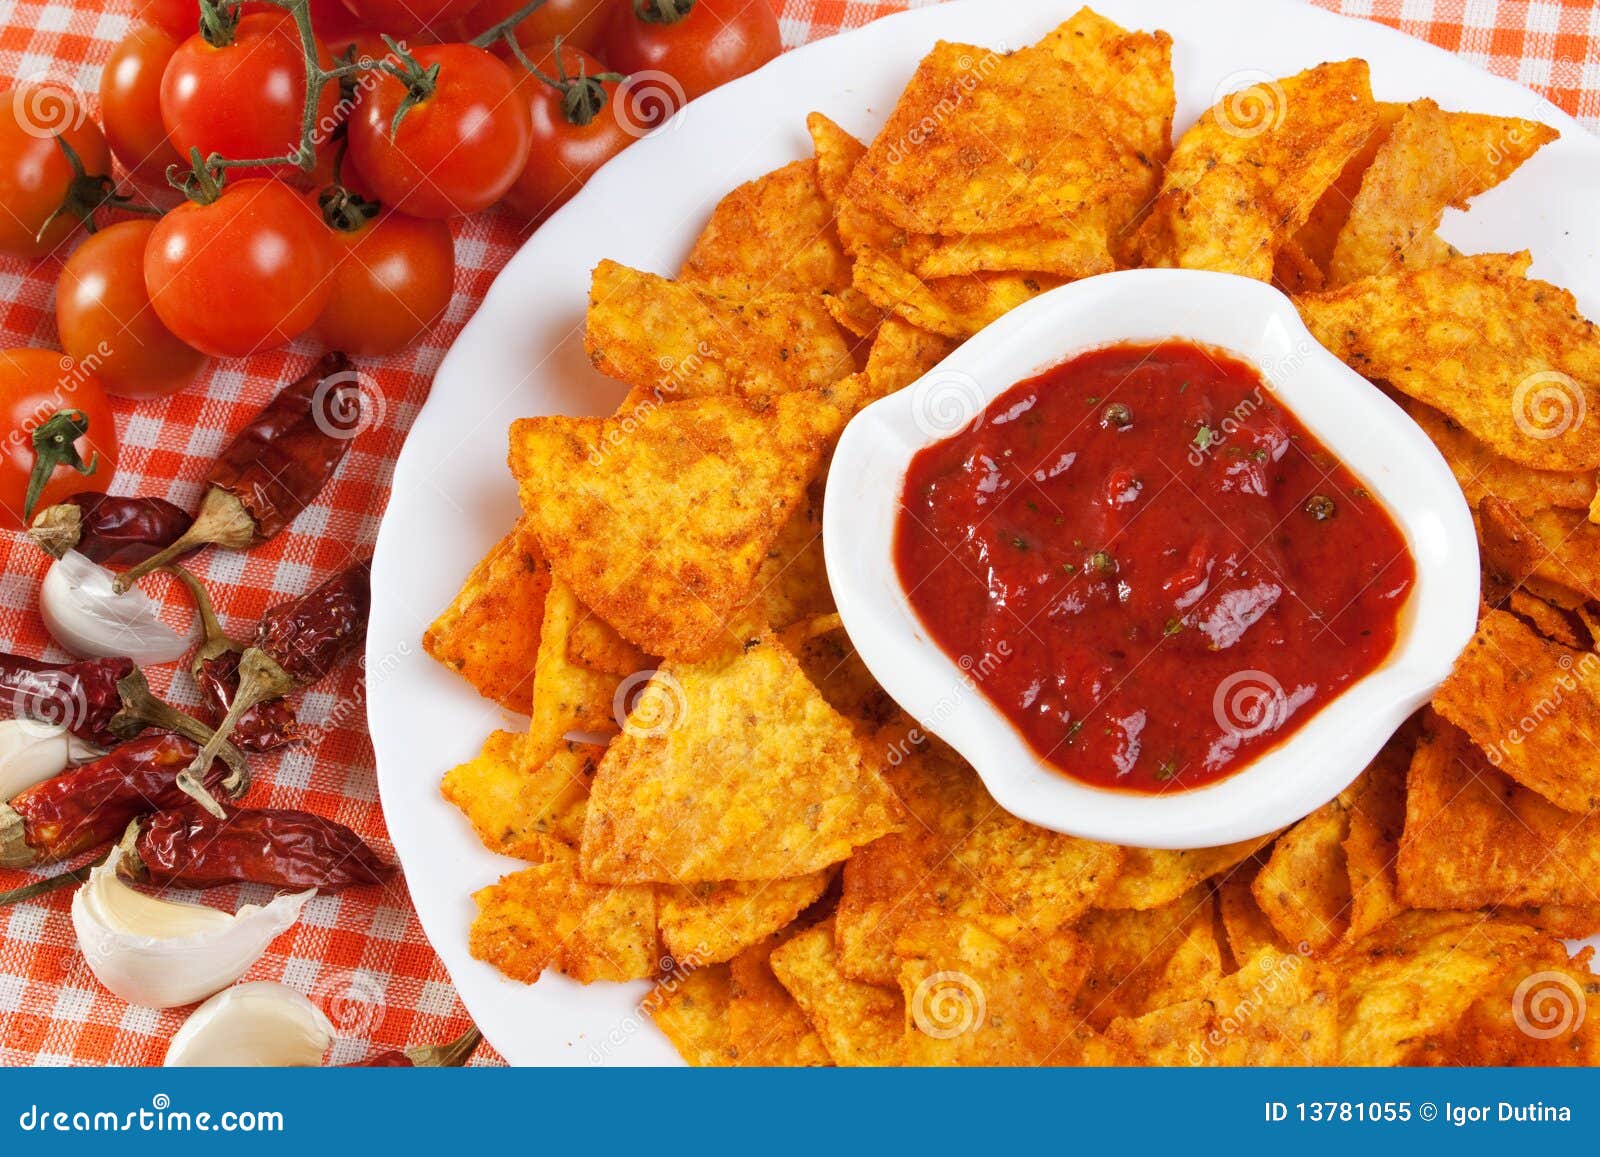 Tortilla Chips with Hot Salsa Dip Stock Image - Image of salsa, mexican ...